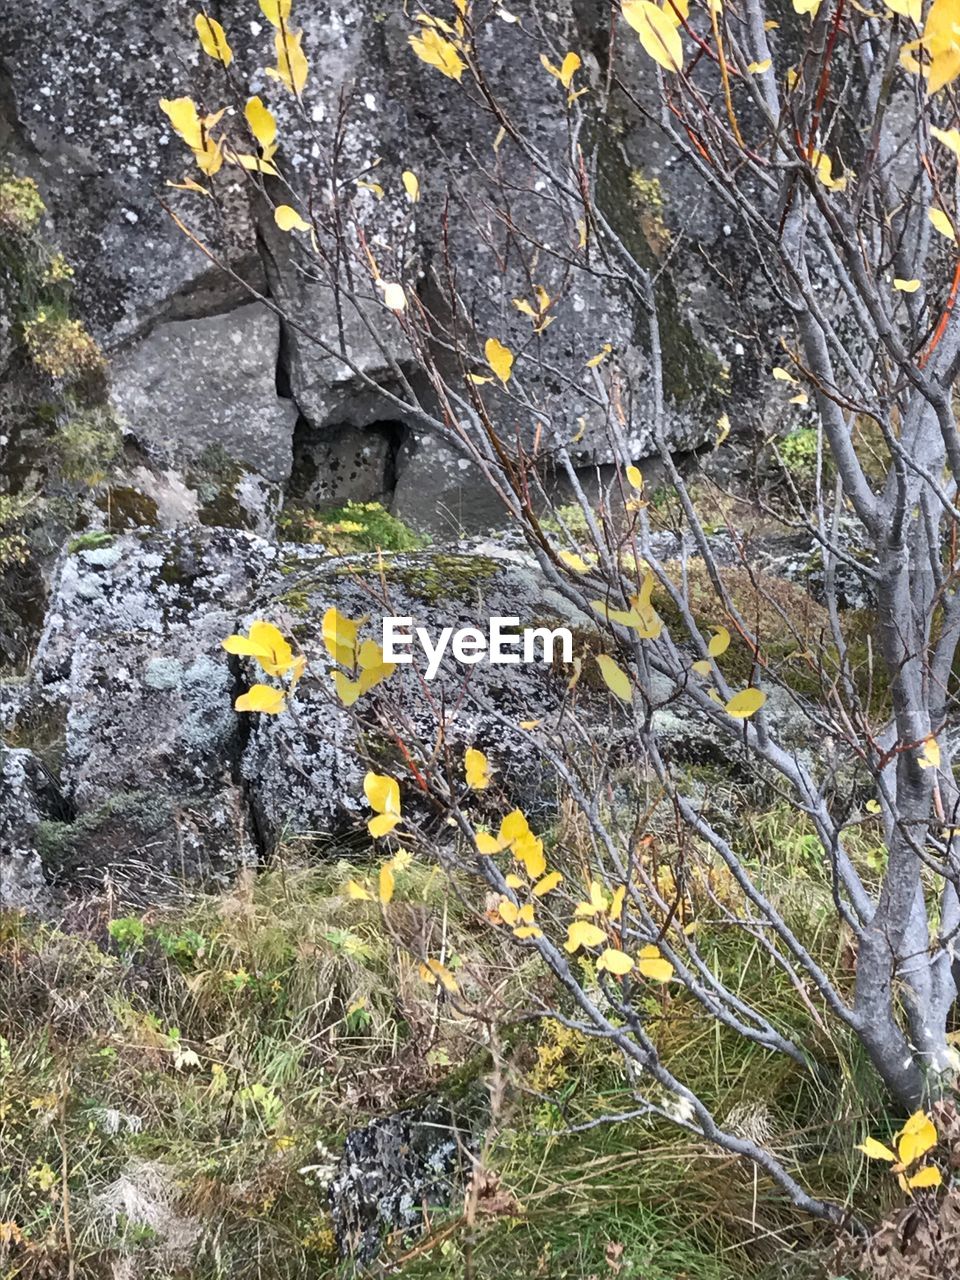 CLOSE-UP OF YELLOW FLOWER GROWING ON ROCK AGAINST TREE